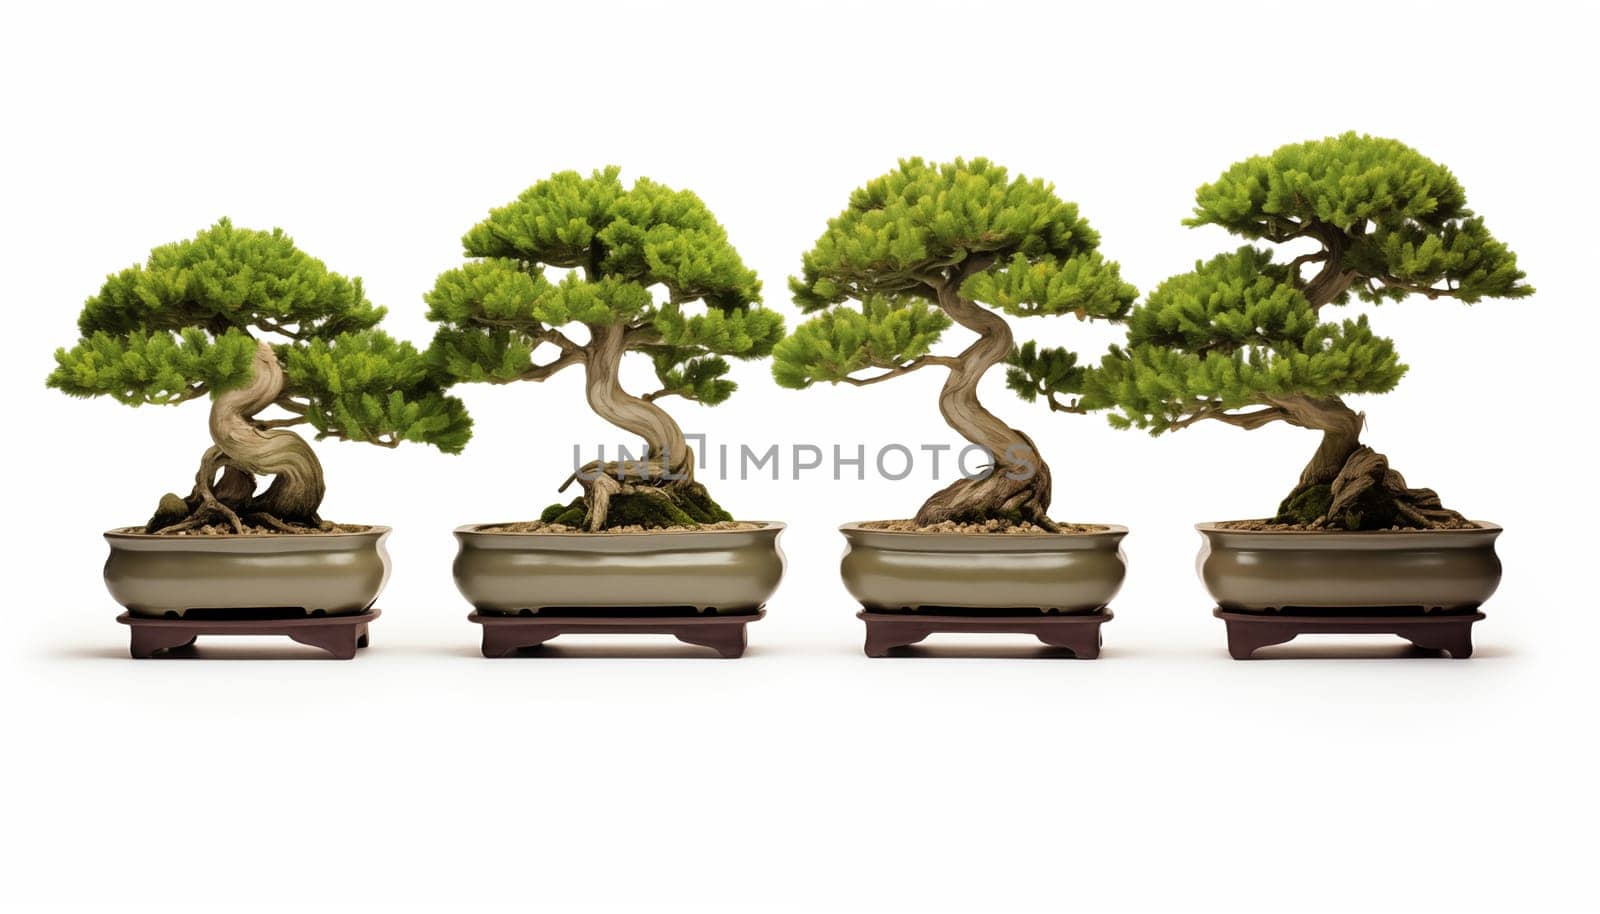 Bonsai trees on white background isolated by Nadtochiy